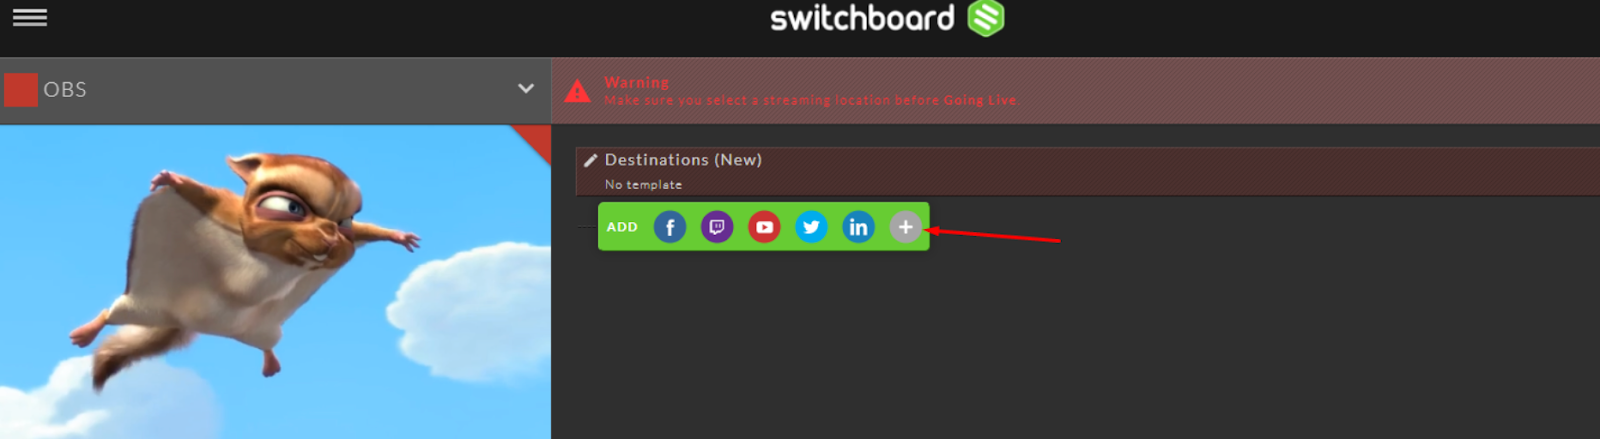 How to stream to Dacast using Switchboard Live - Step 7